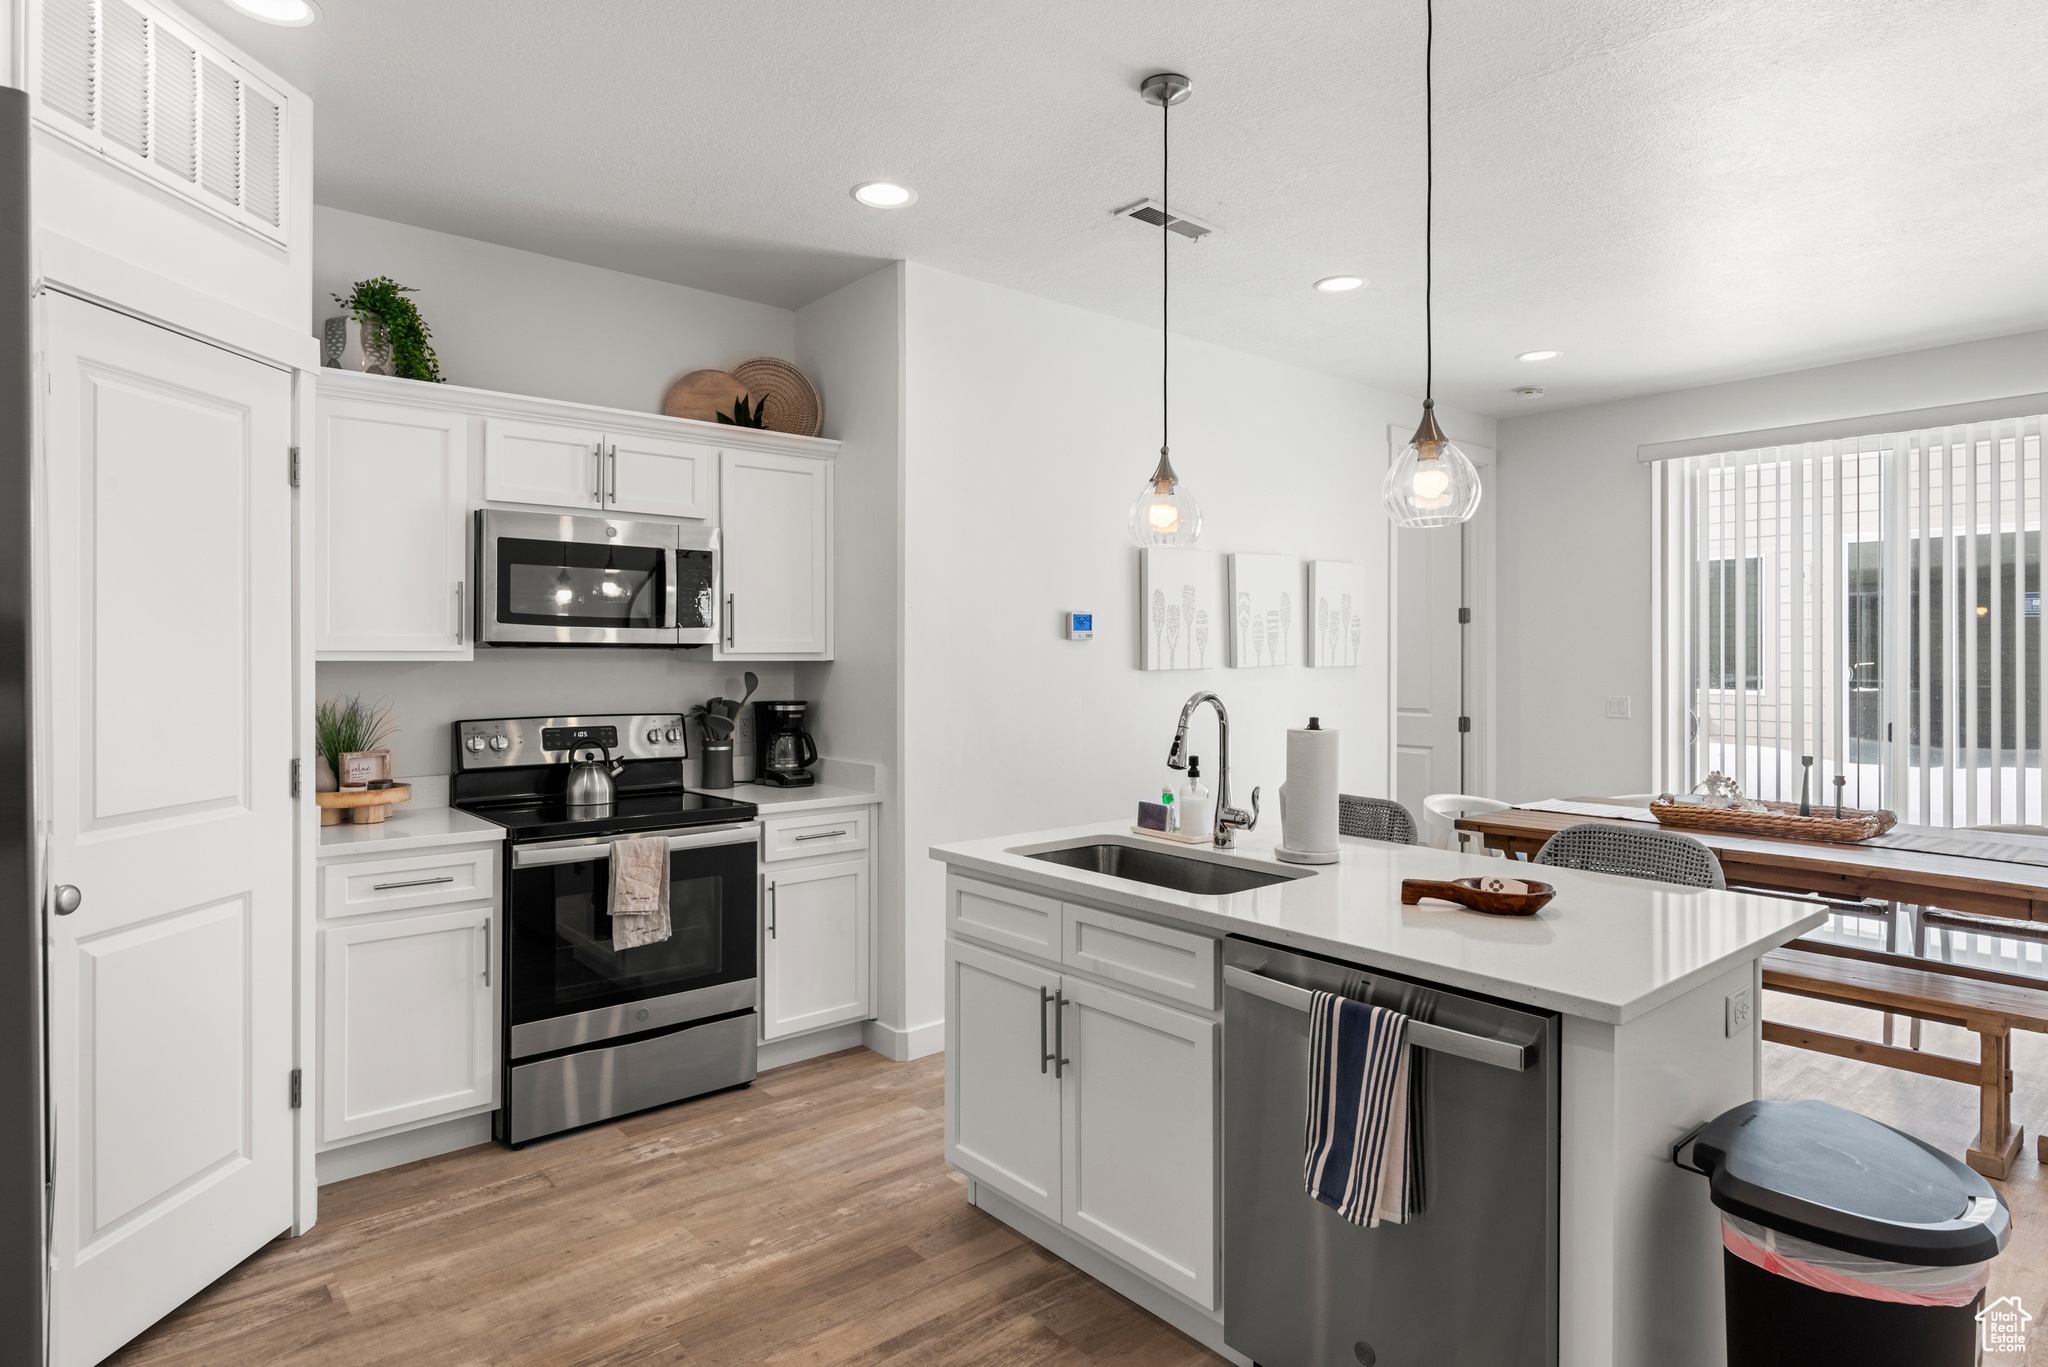 Kitchen with appliances with stainless steel finishes, light hardwood / wood-style flooring, white cabinetry, hanging light fixtures, and an island with sink